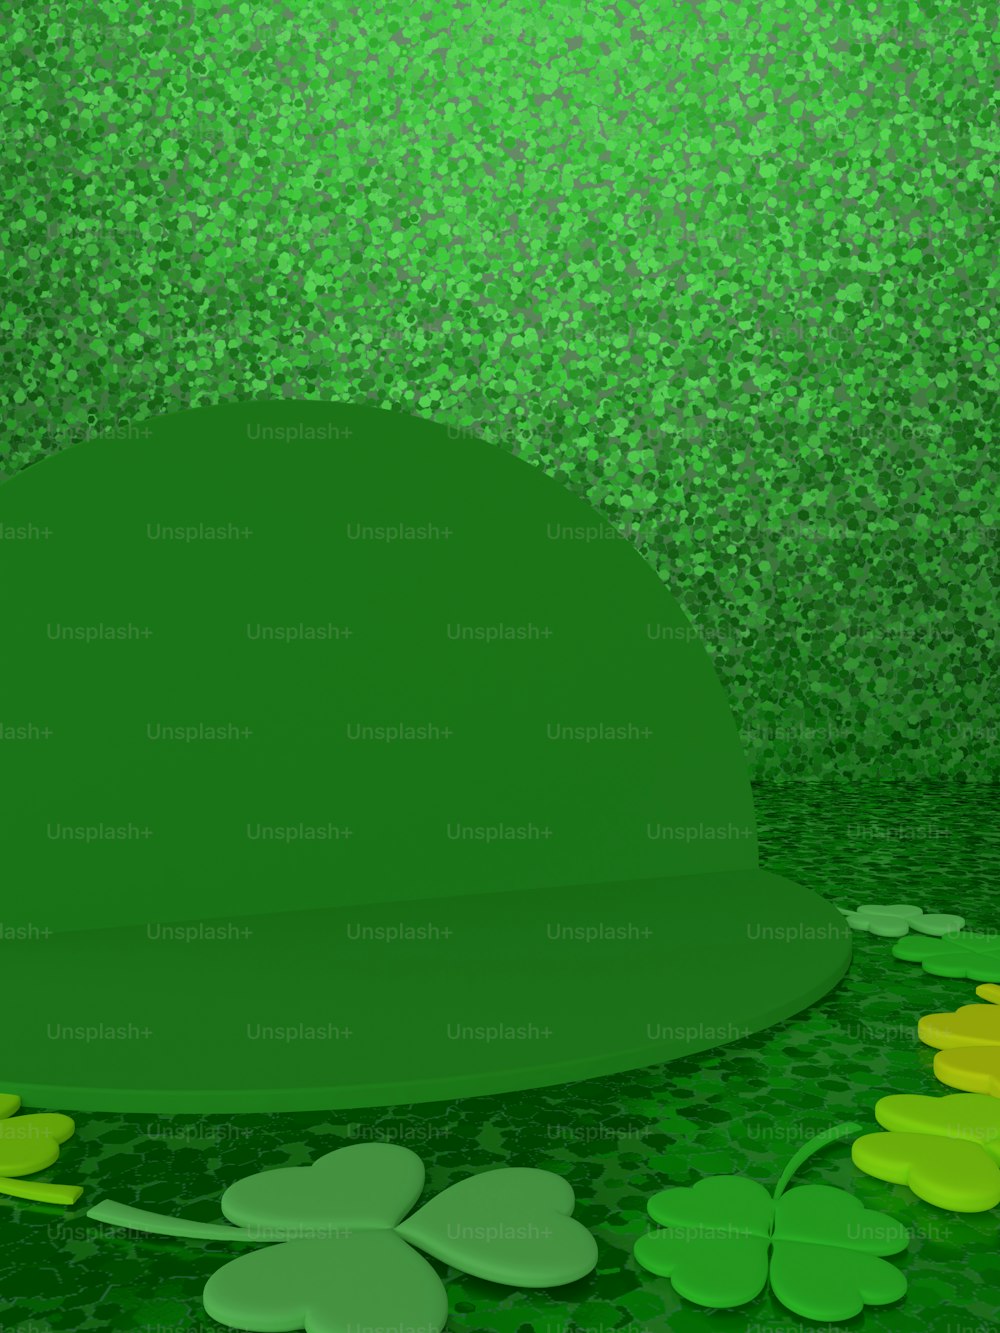 a st patrick's day background with a green hat and shamrocks